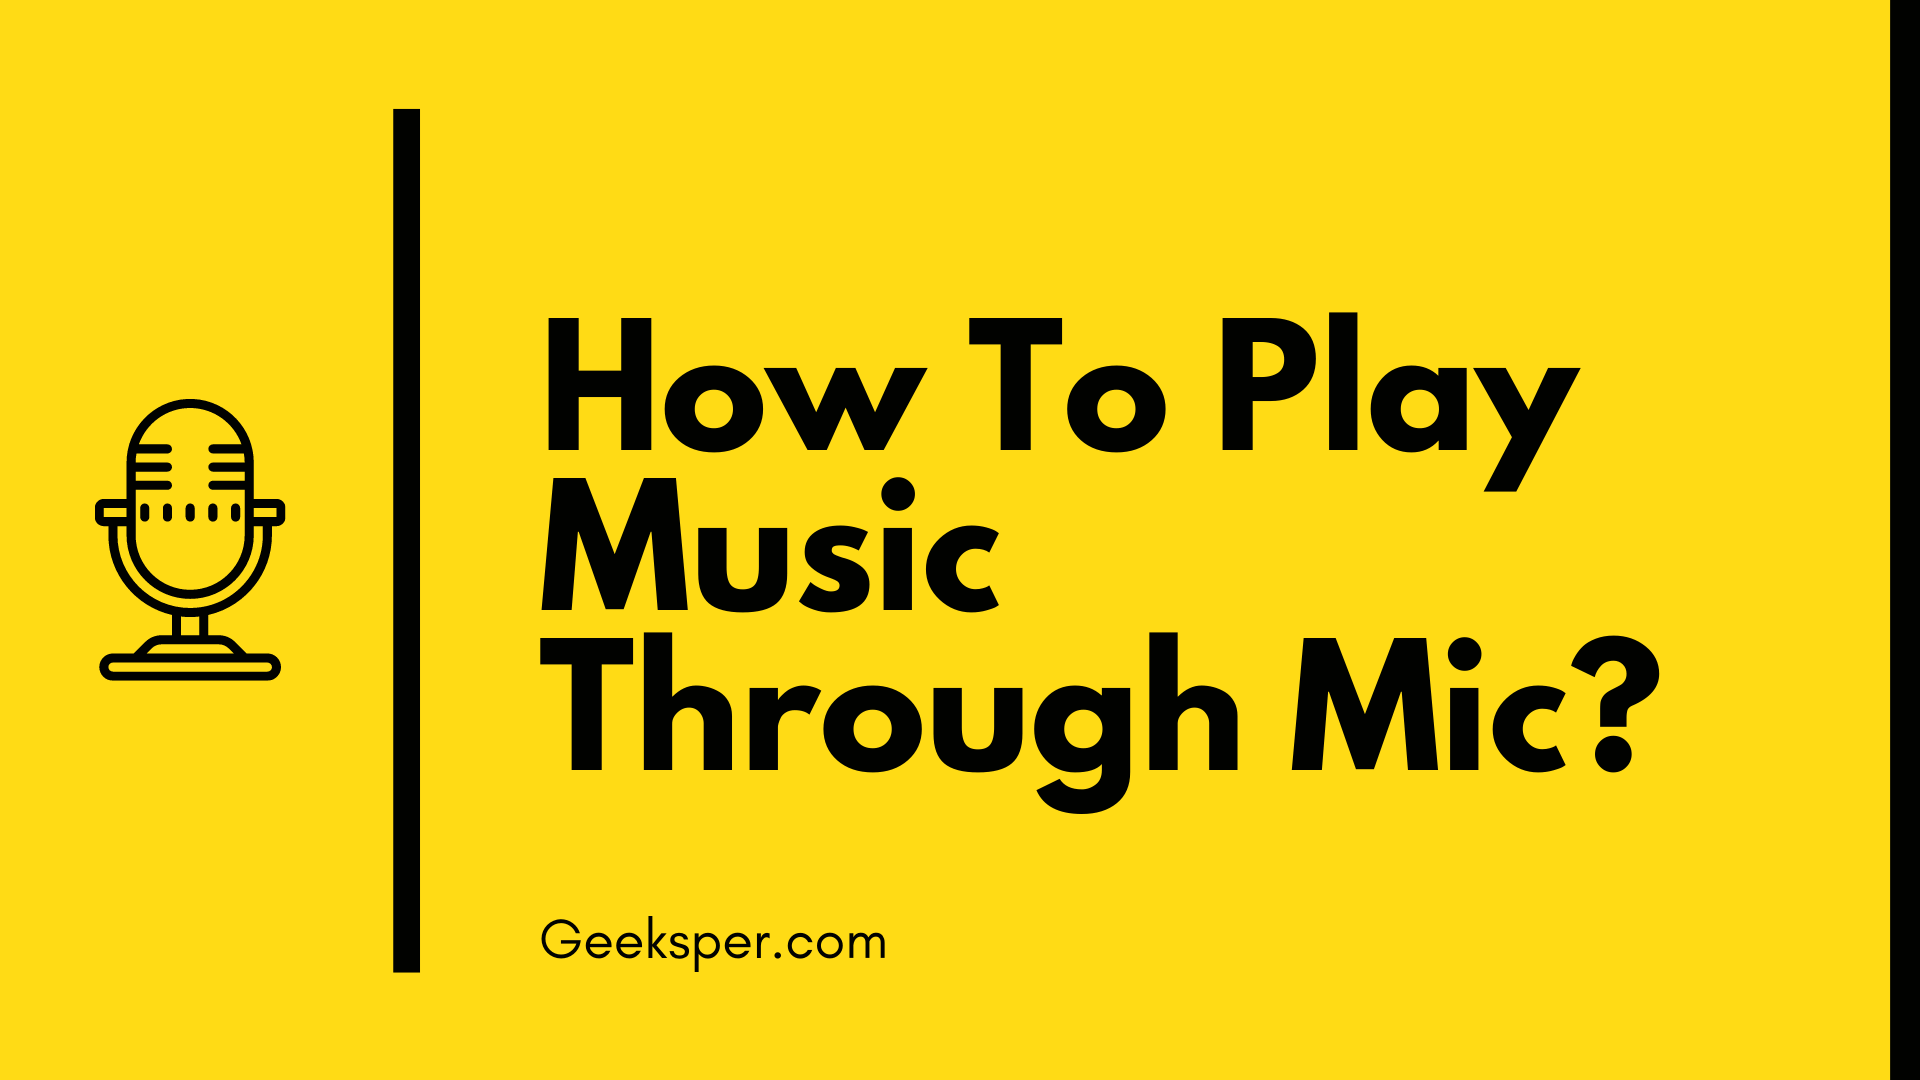 How To Play Music Through Mic